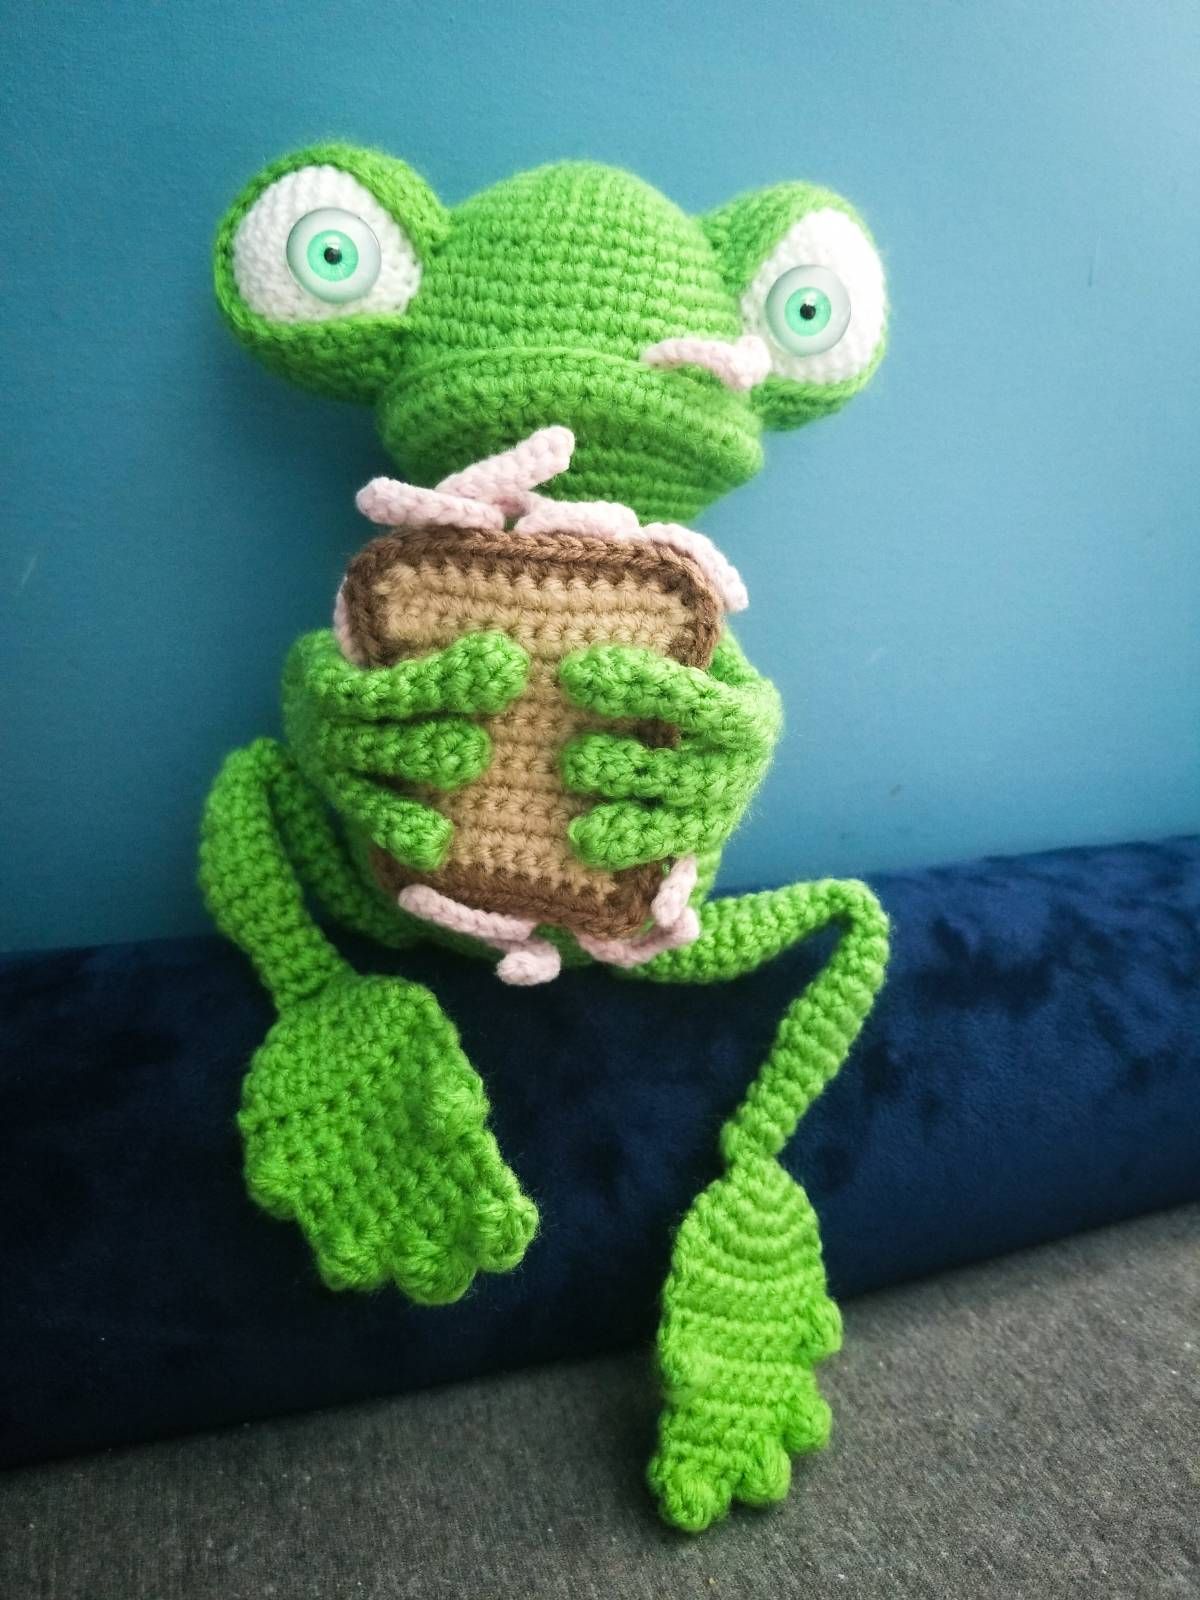 Crochet Amigurumi Frog Pattern Review by Tasha Piech for Cottontail and Whiskers